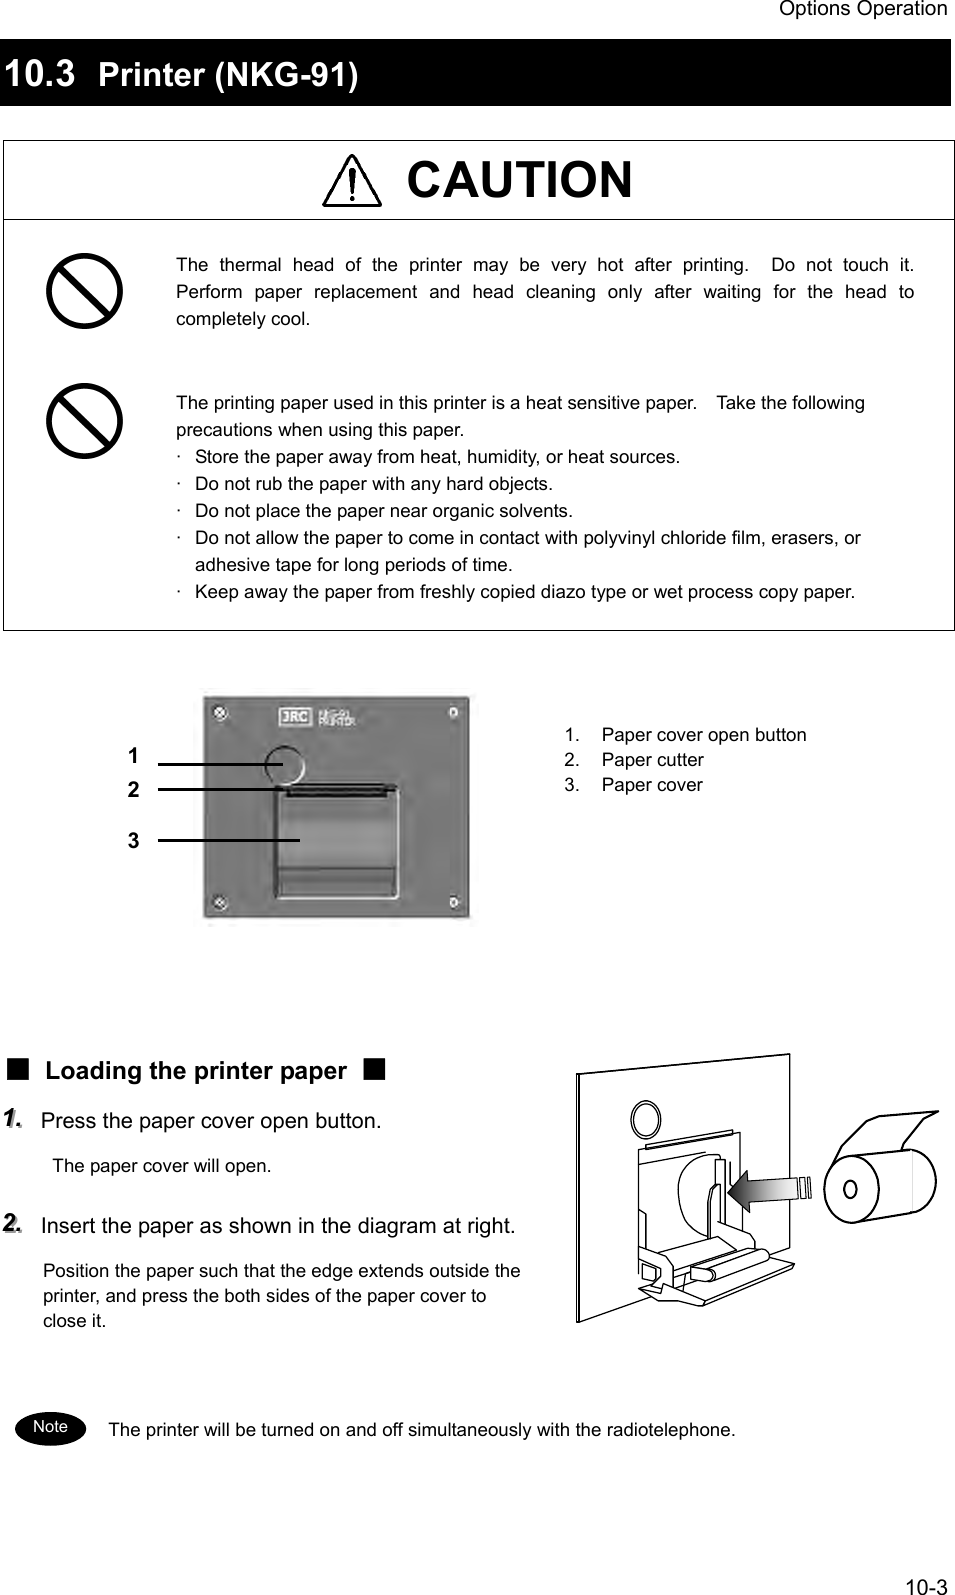 Options Operation 10-3 10.3  Printer (NKG-91)   CAUTION  The thermal head of the printer may be very hot after printing.  Do not touch it.  Perform paper replacement and head cleaning only after waiting for the head to completely cool.   The printing paper used in this printer is a heat sensitive paper.    Take the following precautions when using this paper. ·  Store the paper away from heat, humidity, or heat sources. ·  Do not rub the paper with any hard objects. ·  Do not place the paper near organic solvents. ·  Do not allow the paper to come in contact with polyvinyl chloride film, erasers, or adhesive tape for long periods of time. ·  Keep away the paper from freshly copied diazo type or wet process copy paper.             ■  Loading the printer paper  ■ 111...   Press the paper cover open button.   The paper cover will open. 222...   Insert the paper as shown in the diagram at right. Position the paper such that the edge extends outside the printer, and press the both sides of the paper cover to close it.   The printer will be turned on and off simultaneously with the radiotelephone.   1 2 3 1.  Paper cover open button 2. Paper cutter 3. Paper cover Note 